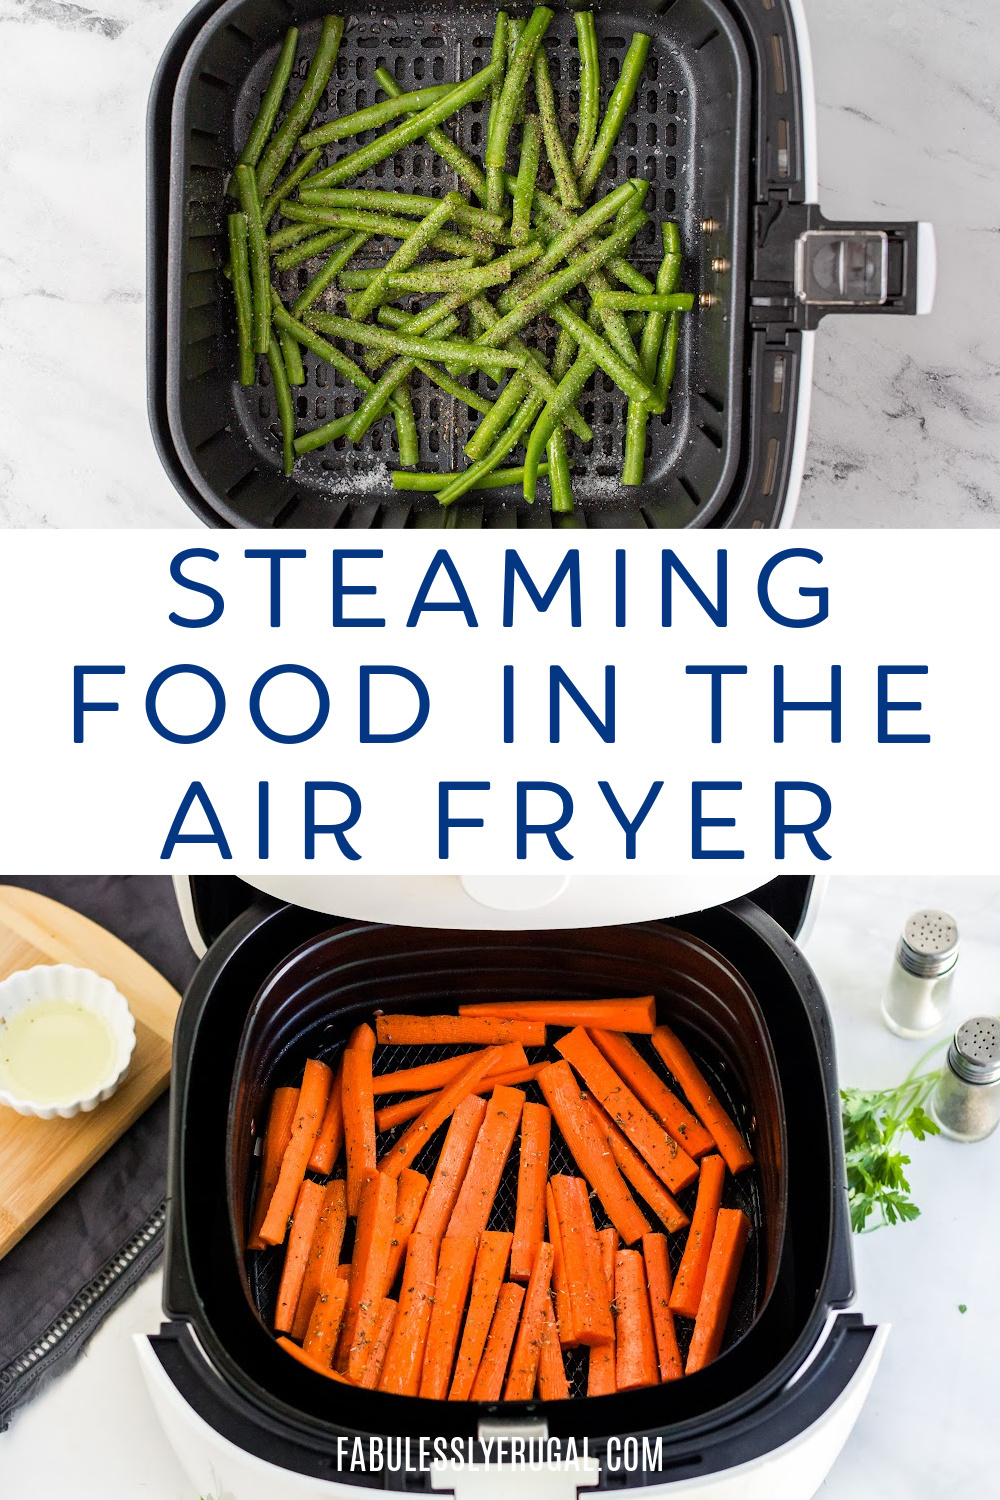 https://fabulesslyfrugal.com/wp-content/uploads/2023/03/everything_you_need_to_know_about_steaming_food_in_the_air_fryer-1.jpeg